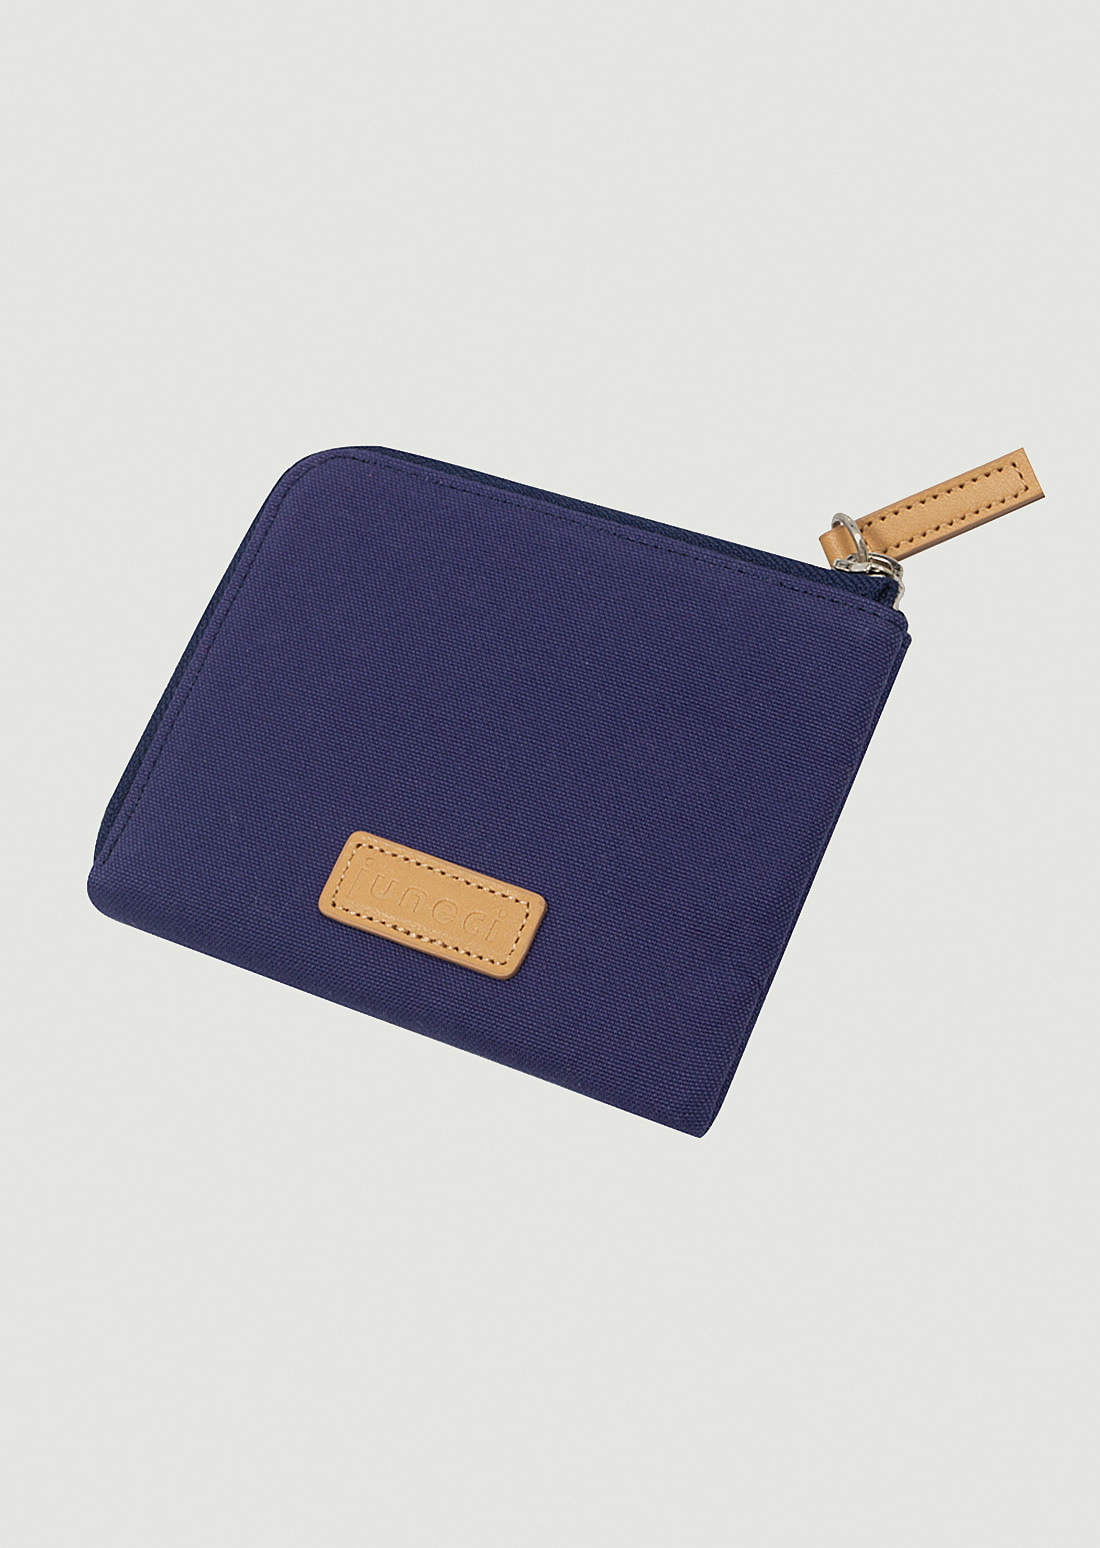 ’THE MOMENT’ Oxford Wallet (Navy)